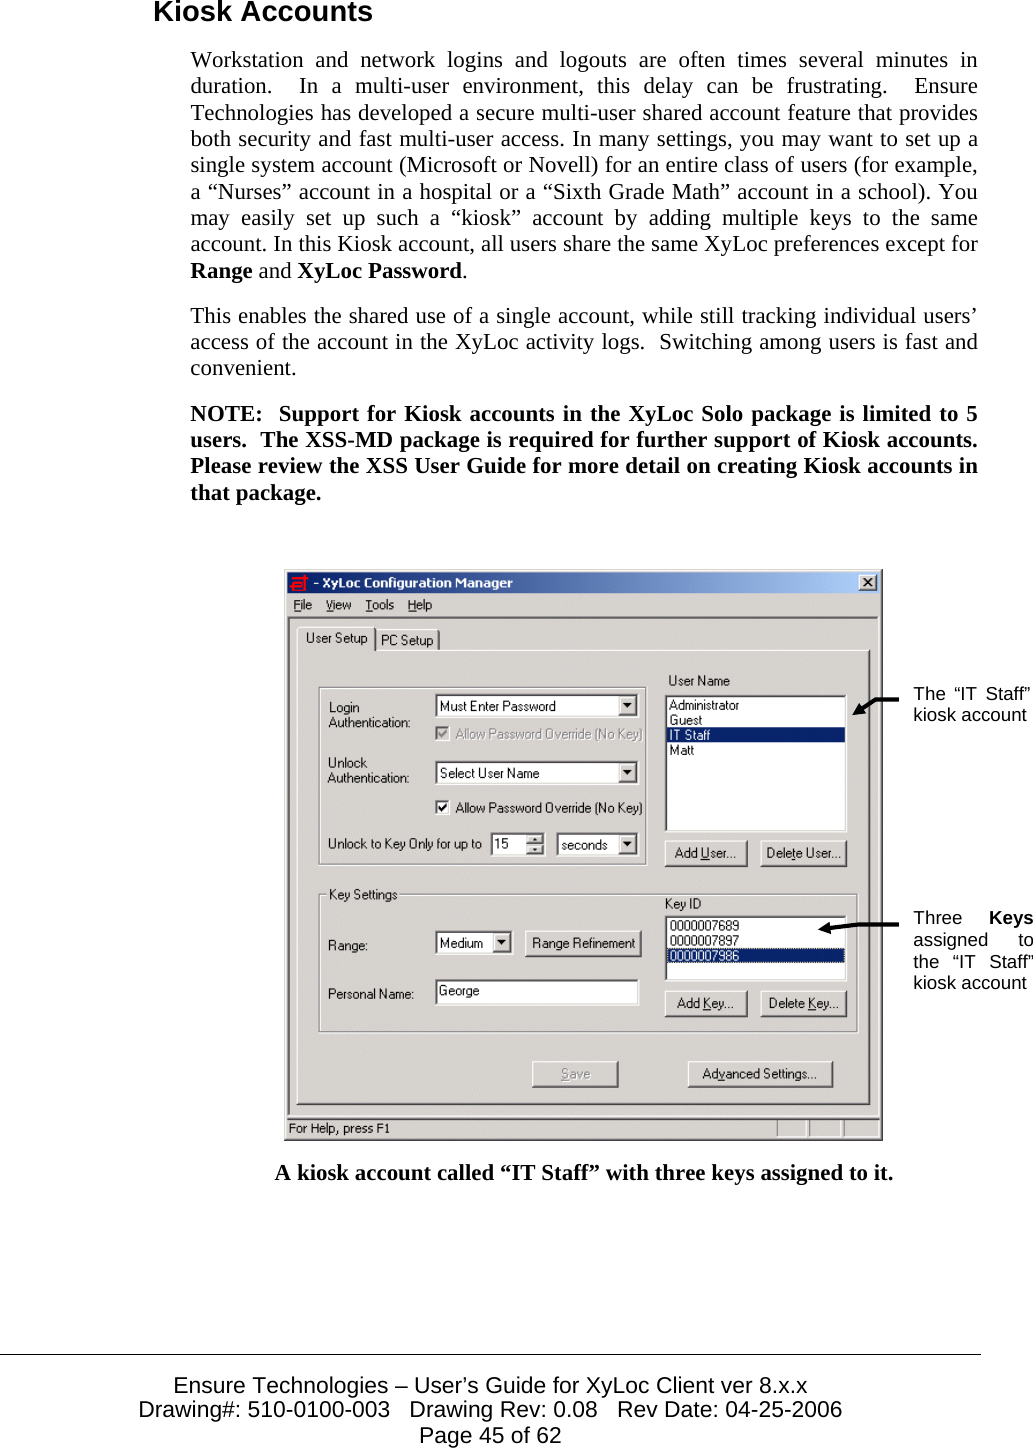  Ensure Technologies – User’s Guide for XyLoc Client ver 8.x.x Drawing#: 510-0100-003   Drawing Rev: 0.08   Rev Date: 04-25-2006 Page 45 of 62 Kiosk Accounts Workstation and network logins and logouts are often times several minutes in duration.  In a multi-user environment, this delay can be frustrating.  Ensure Technologies has developed a secure multi-user shared account feature that provides both security and fast multi-user access. In many settings, you may want to set up a single system account (Microsoft or Novell) for an entire class of users (for example, a “Nurses” account in a hospital or a “Sixth Grade Math” account in a school). You may easily set up such a “kiosk” account by adding multiple keys to the same account. In this Kiosk account, all users share the same XyLoc preferences except for Range and XyLoc Password. This enables the shared use of a single account, while still tracking individual users’ access of the account in the XyLoc activity logs.  Switching among users is fast and convenient. NOTE:  Support for Kiosk accounts in the XyLoc Solo package is limited to 5 users.  The XSS-MD package is required for further support of Kiosk accounts.  Please review the XSS User Guide for more detail on creating Kiosk accounts in that package.   A kiosk account called “IT Staff” with three keys assigned to it. The “IT Staff” kiosk accountThree  Keysassigned to the “IT Staff” kiosk account